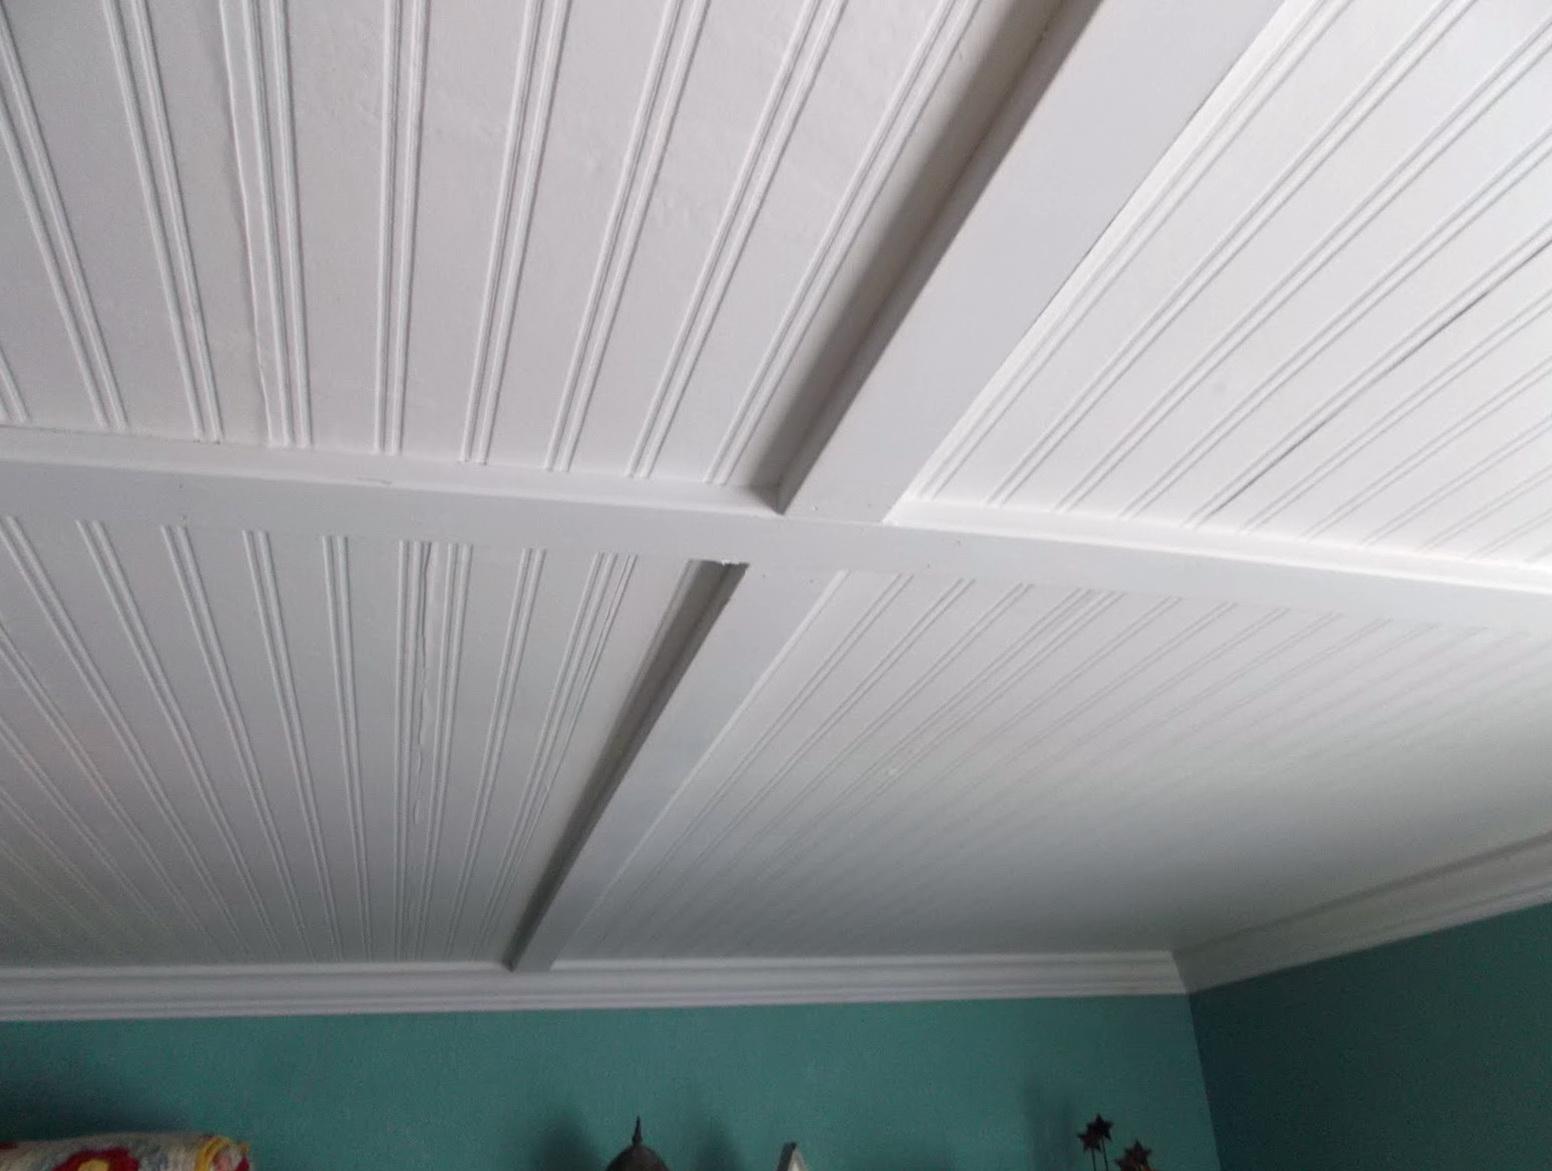 Permalink to Covering Popcorn Ceiling Tiles